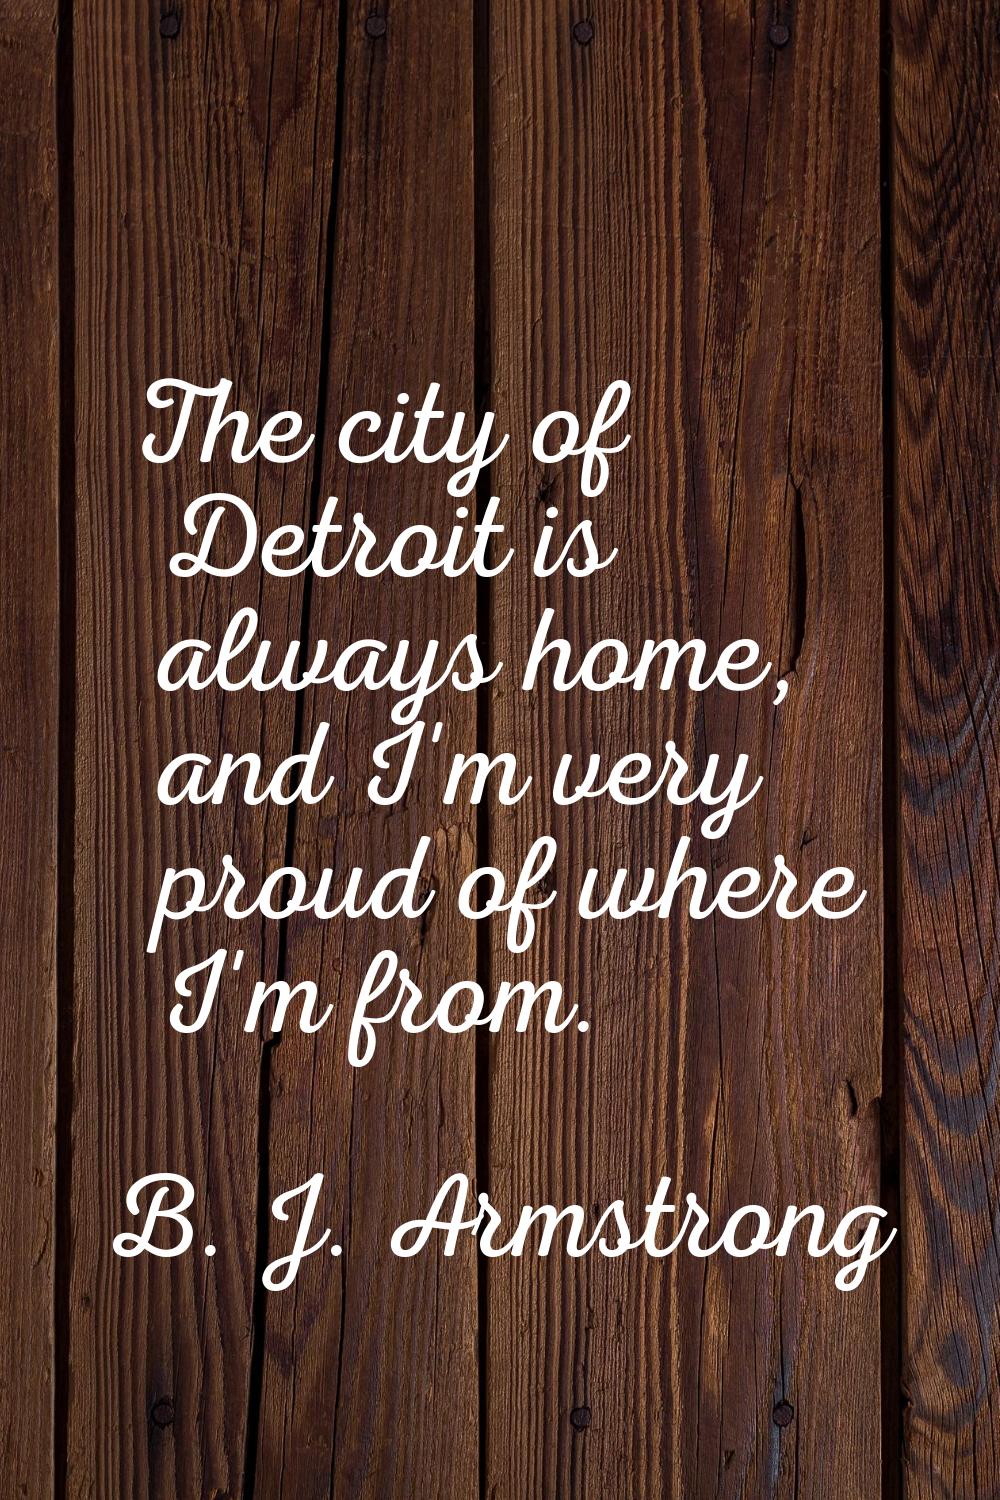 The city of Detroit is always home, and I'm very proud of where I'm from.